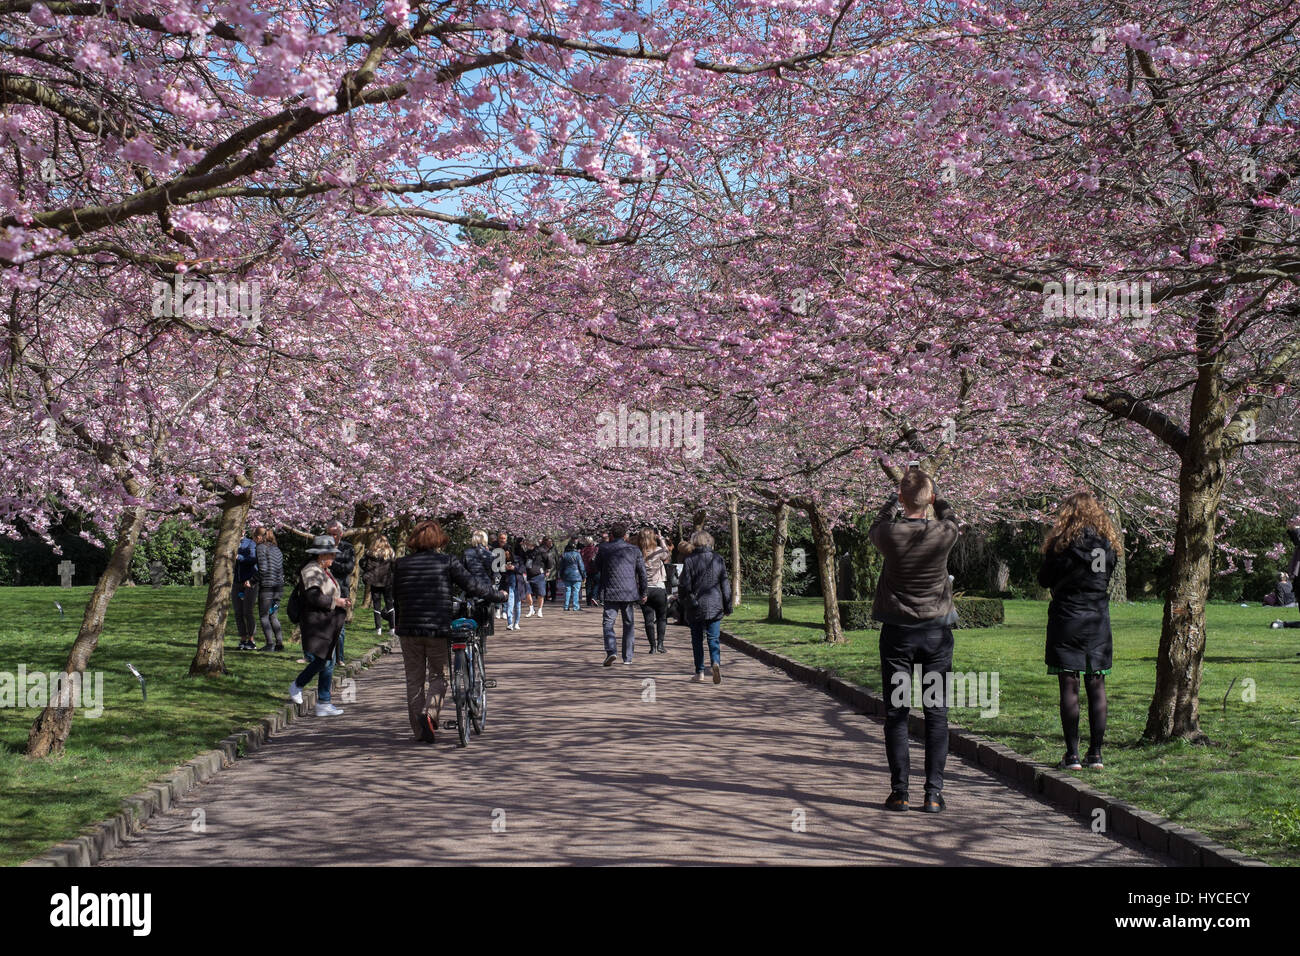 Spring arrives in Denmark. Once a year locals and tourists flock to Bispebjerg Cemetery, Copenhagen to enjoy the avenue of pink cherry tree blossoms. Stock Photo